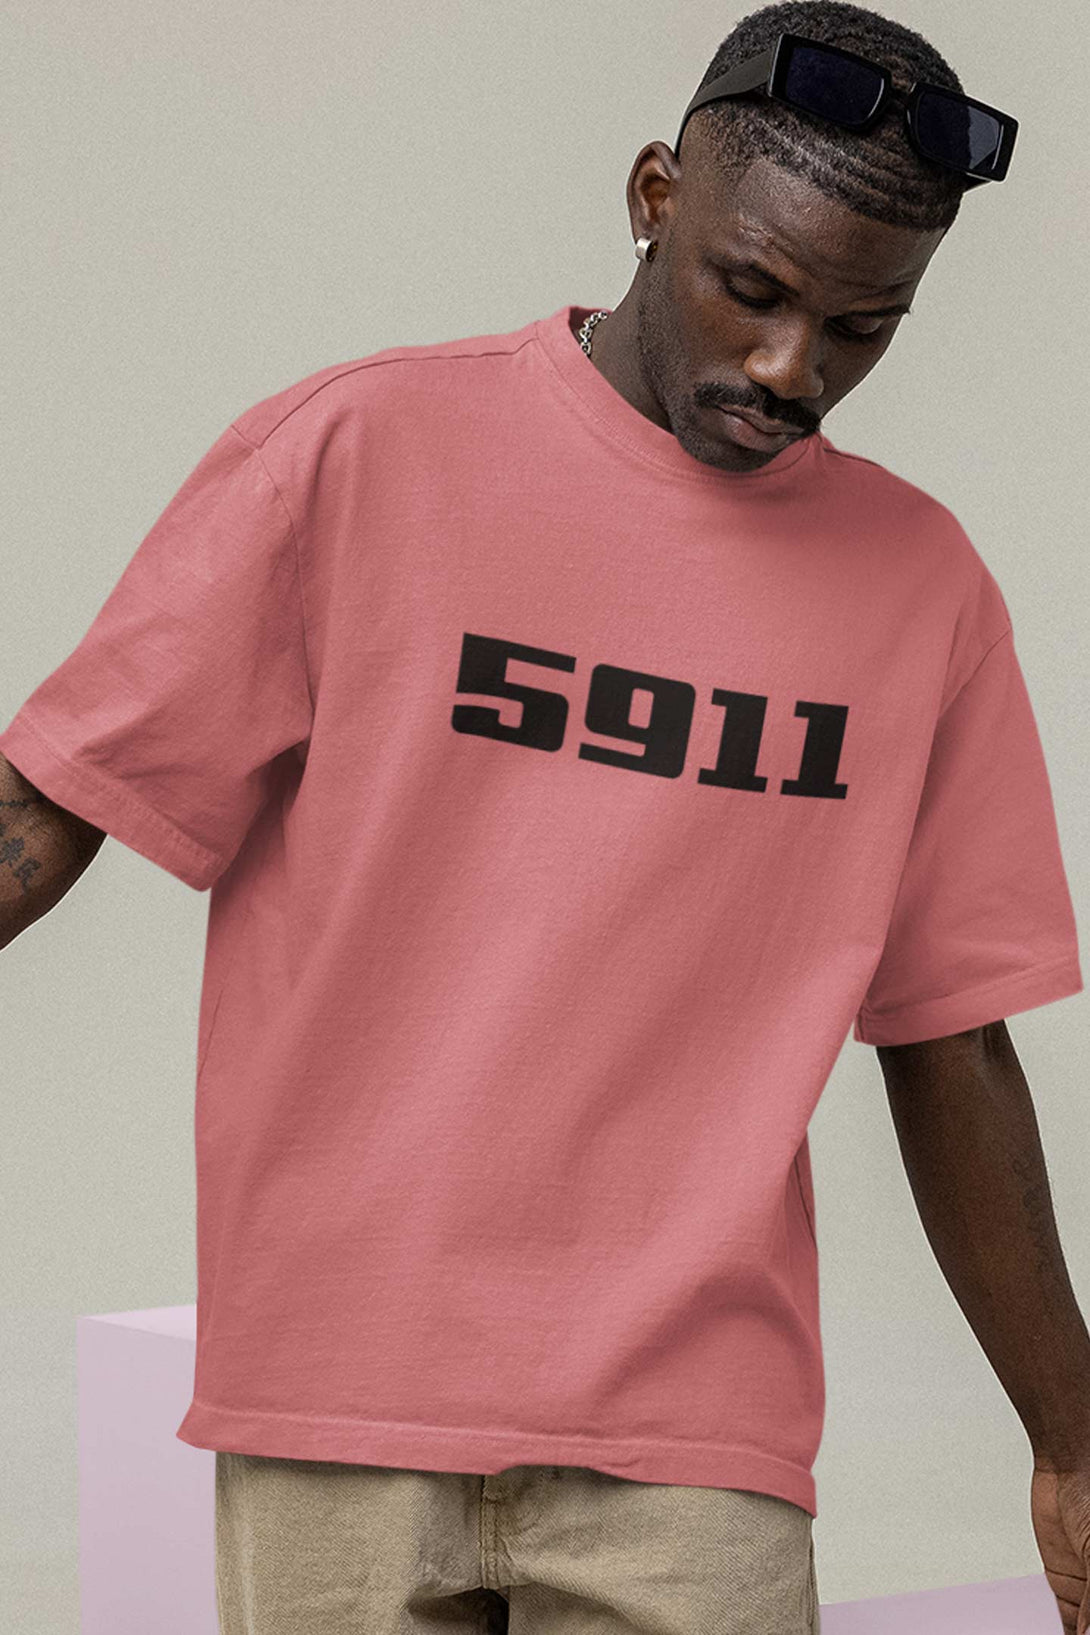 5911 printed on front of Dusty Rose Color Oversized T-shirt